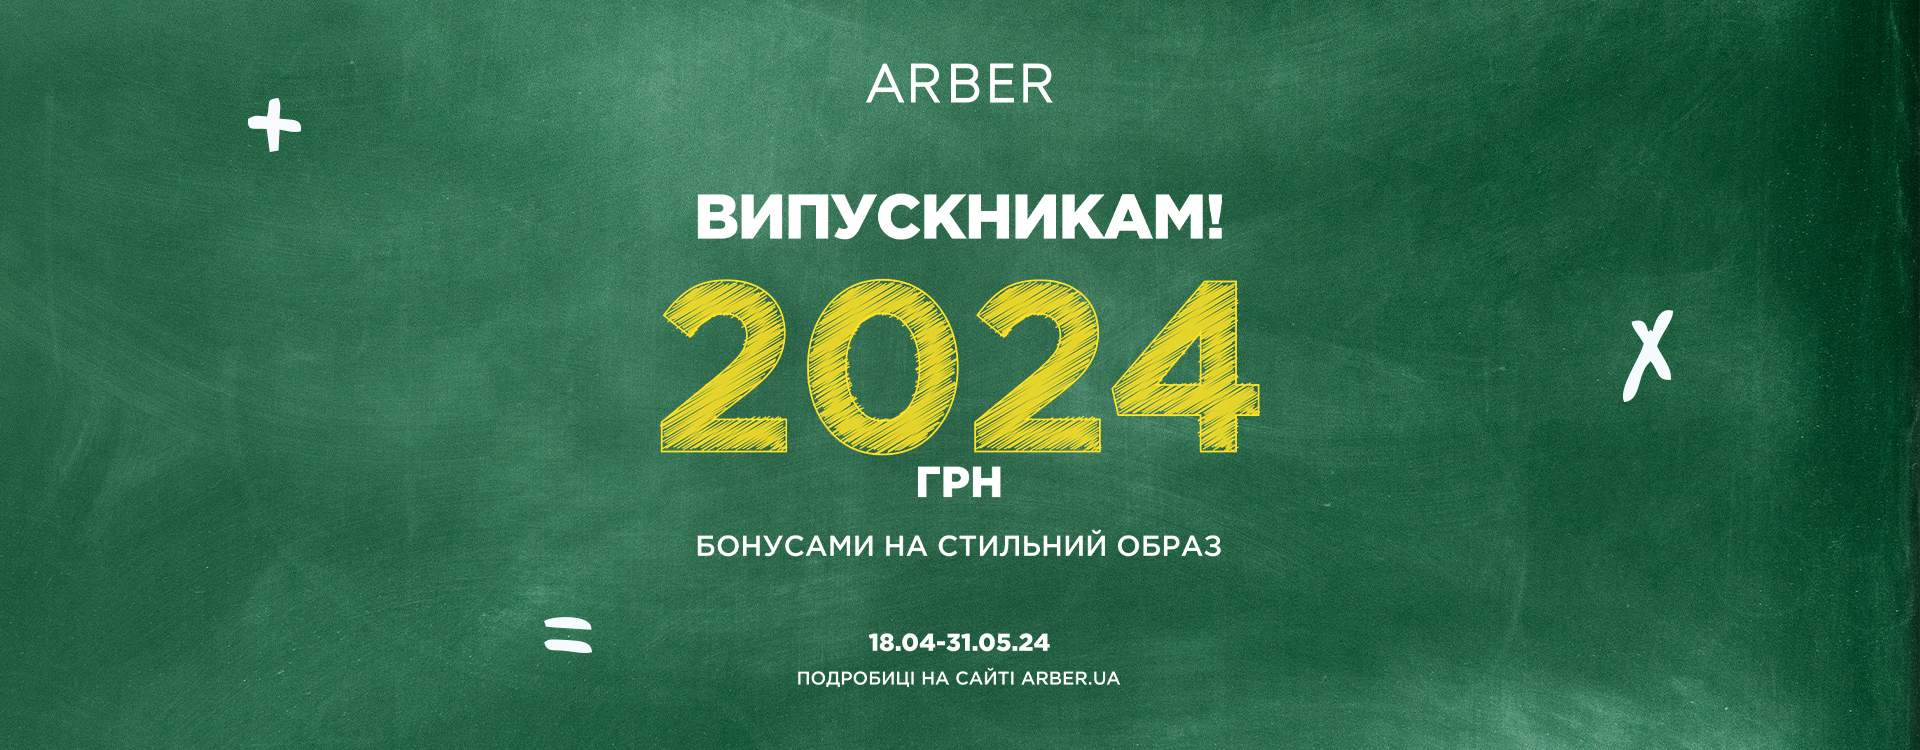 Promotion for graduates from ARBER